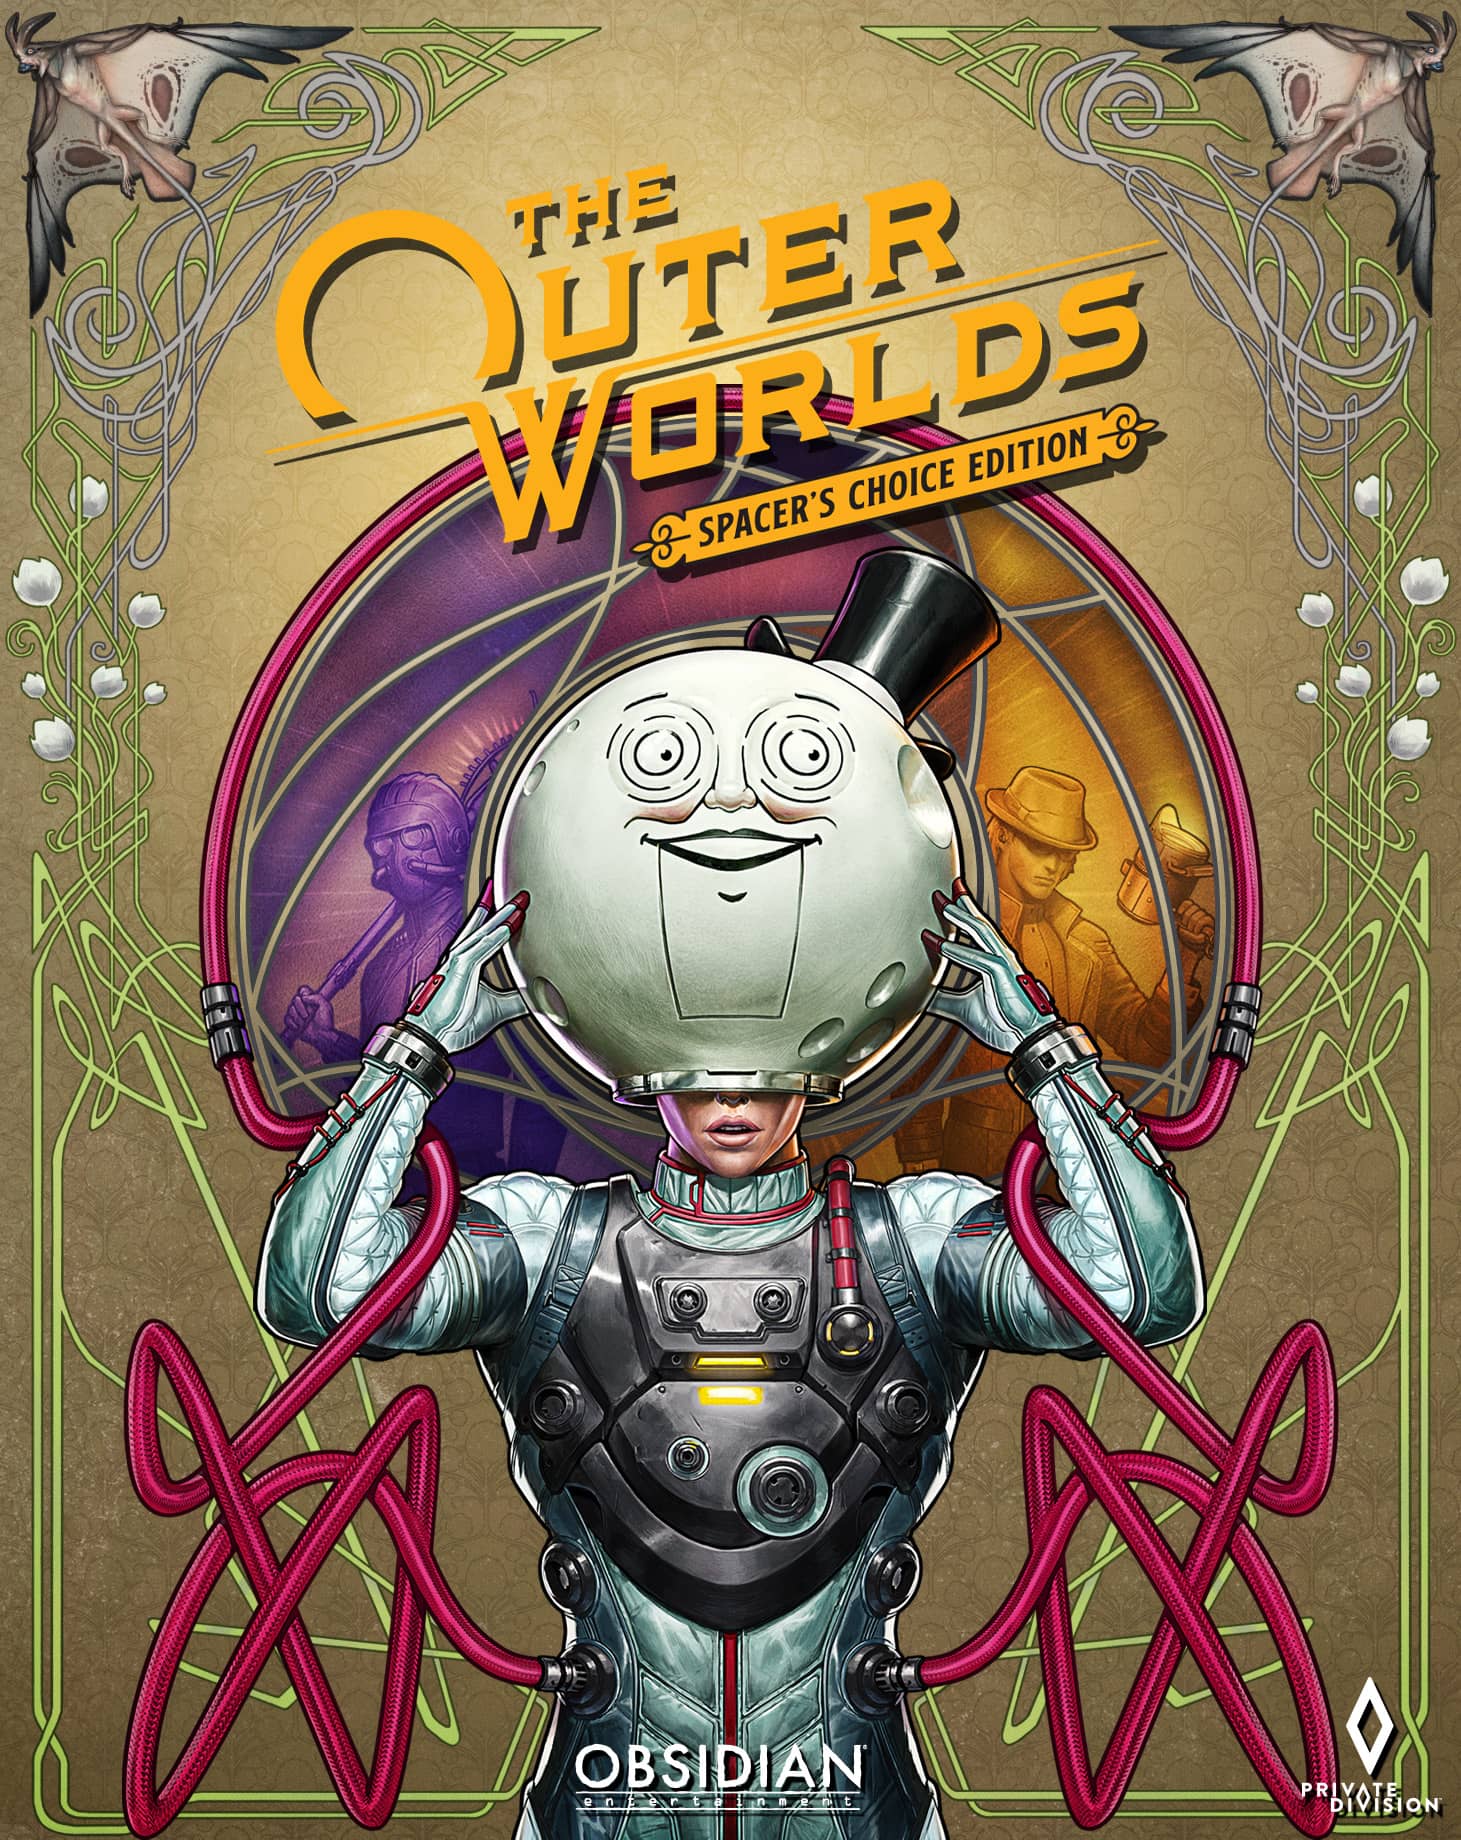 Картинка THE OUTER WORLDS: SPACER'S CHOICE EDITION